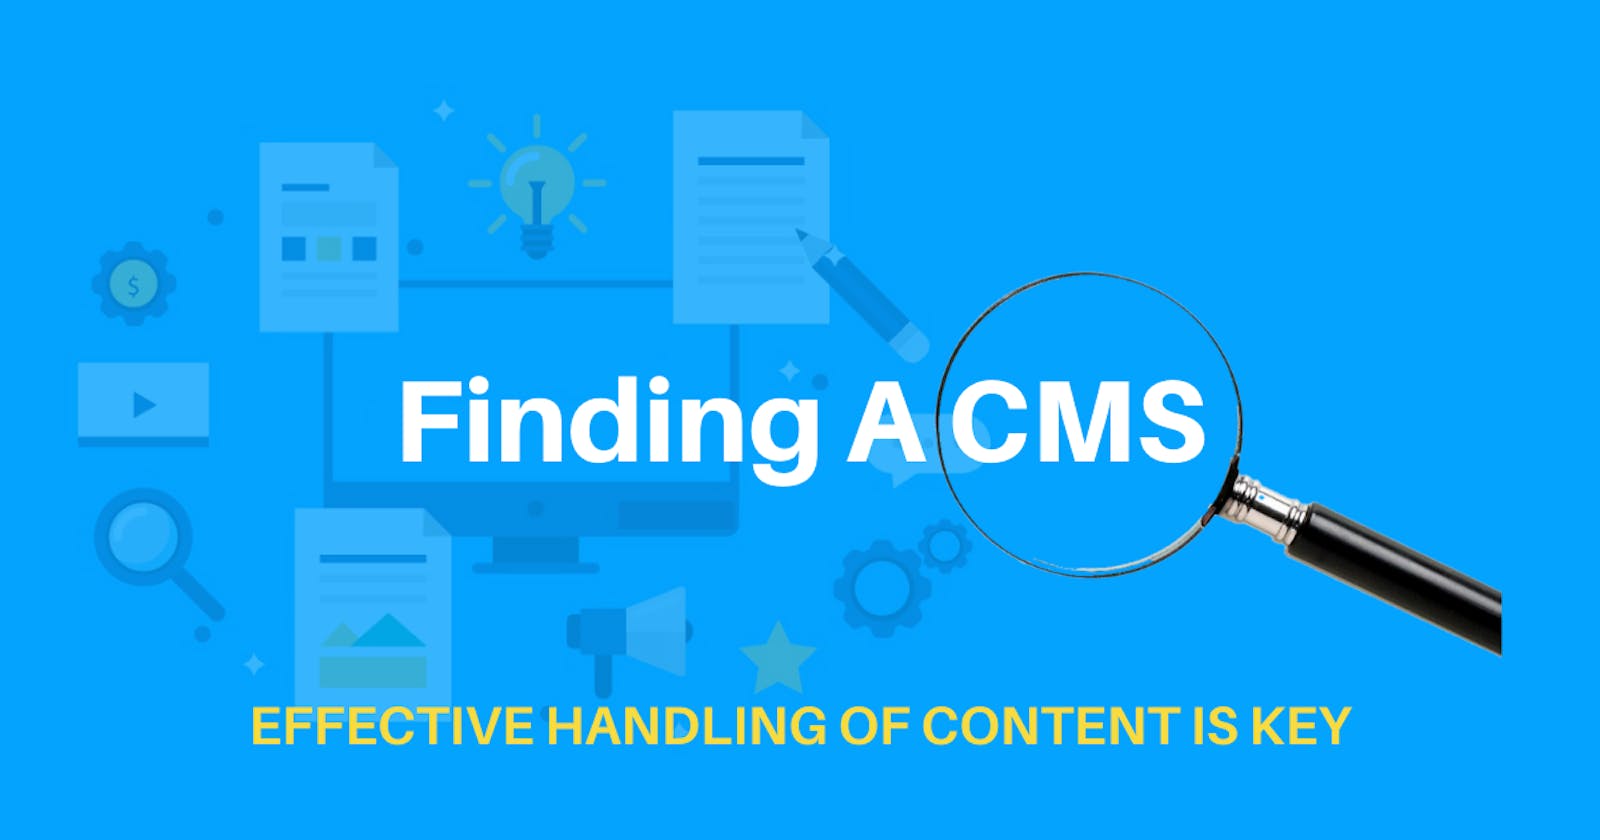 Finding A CMS